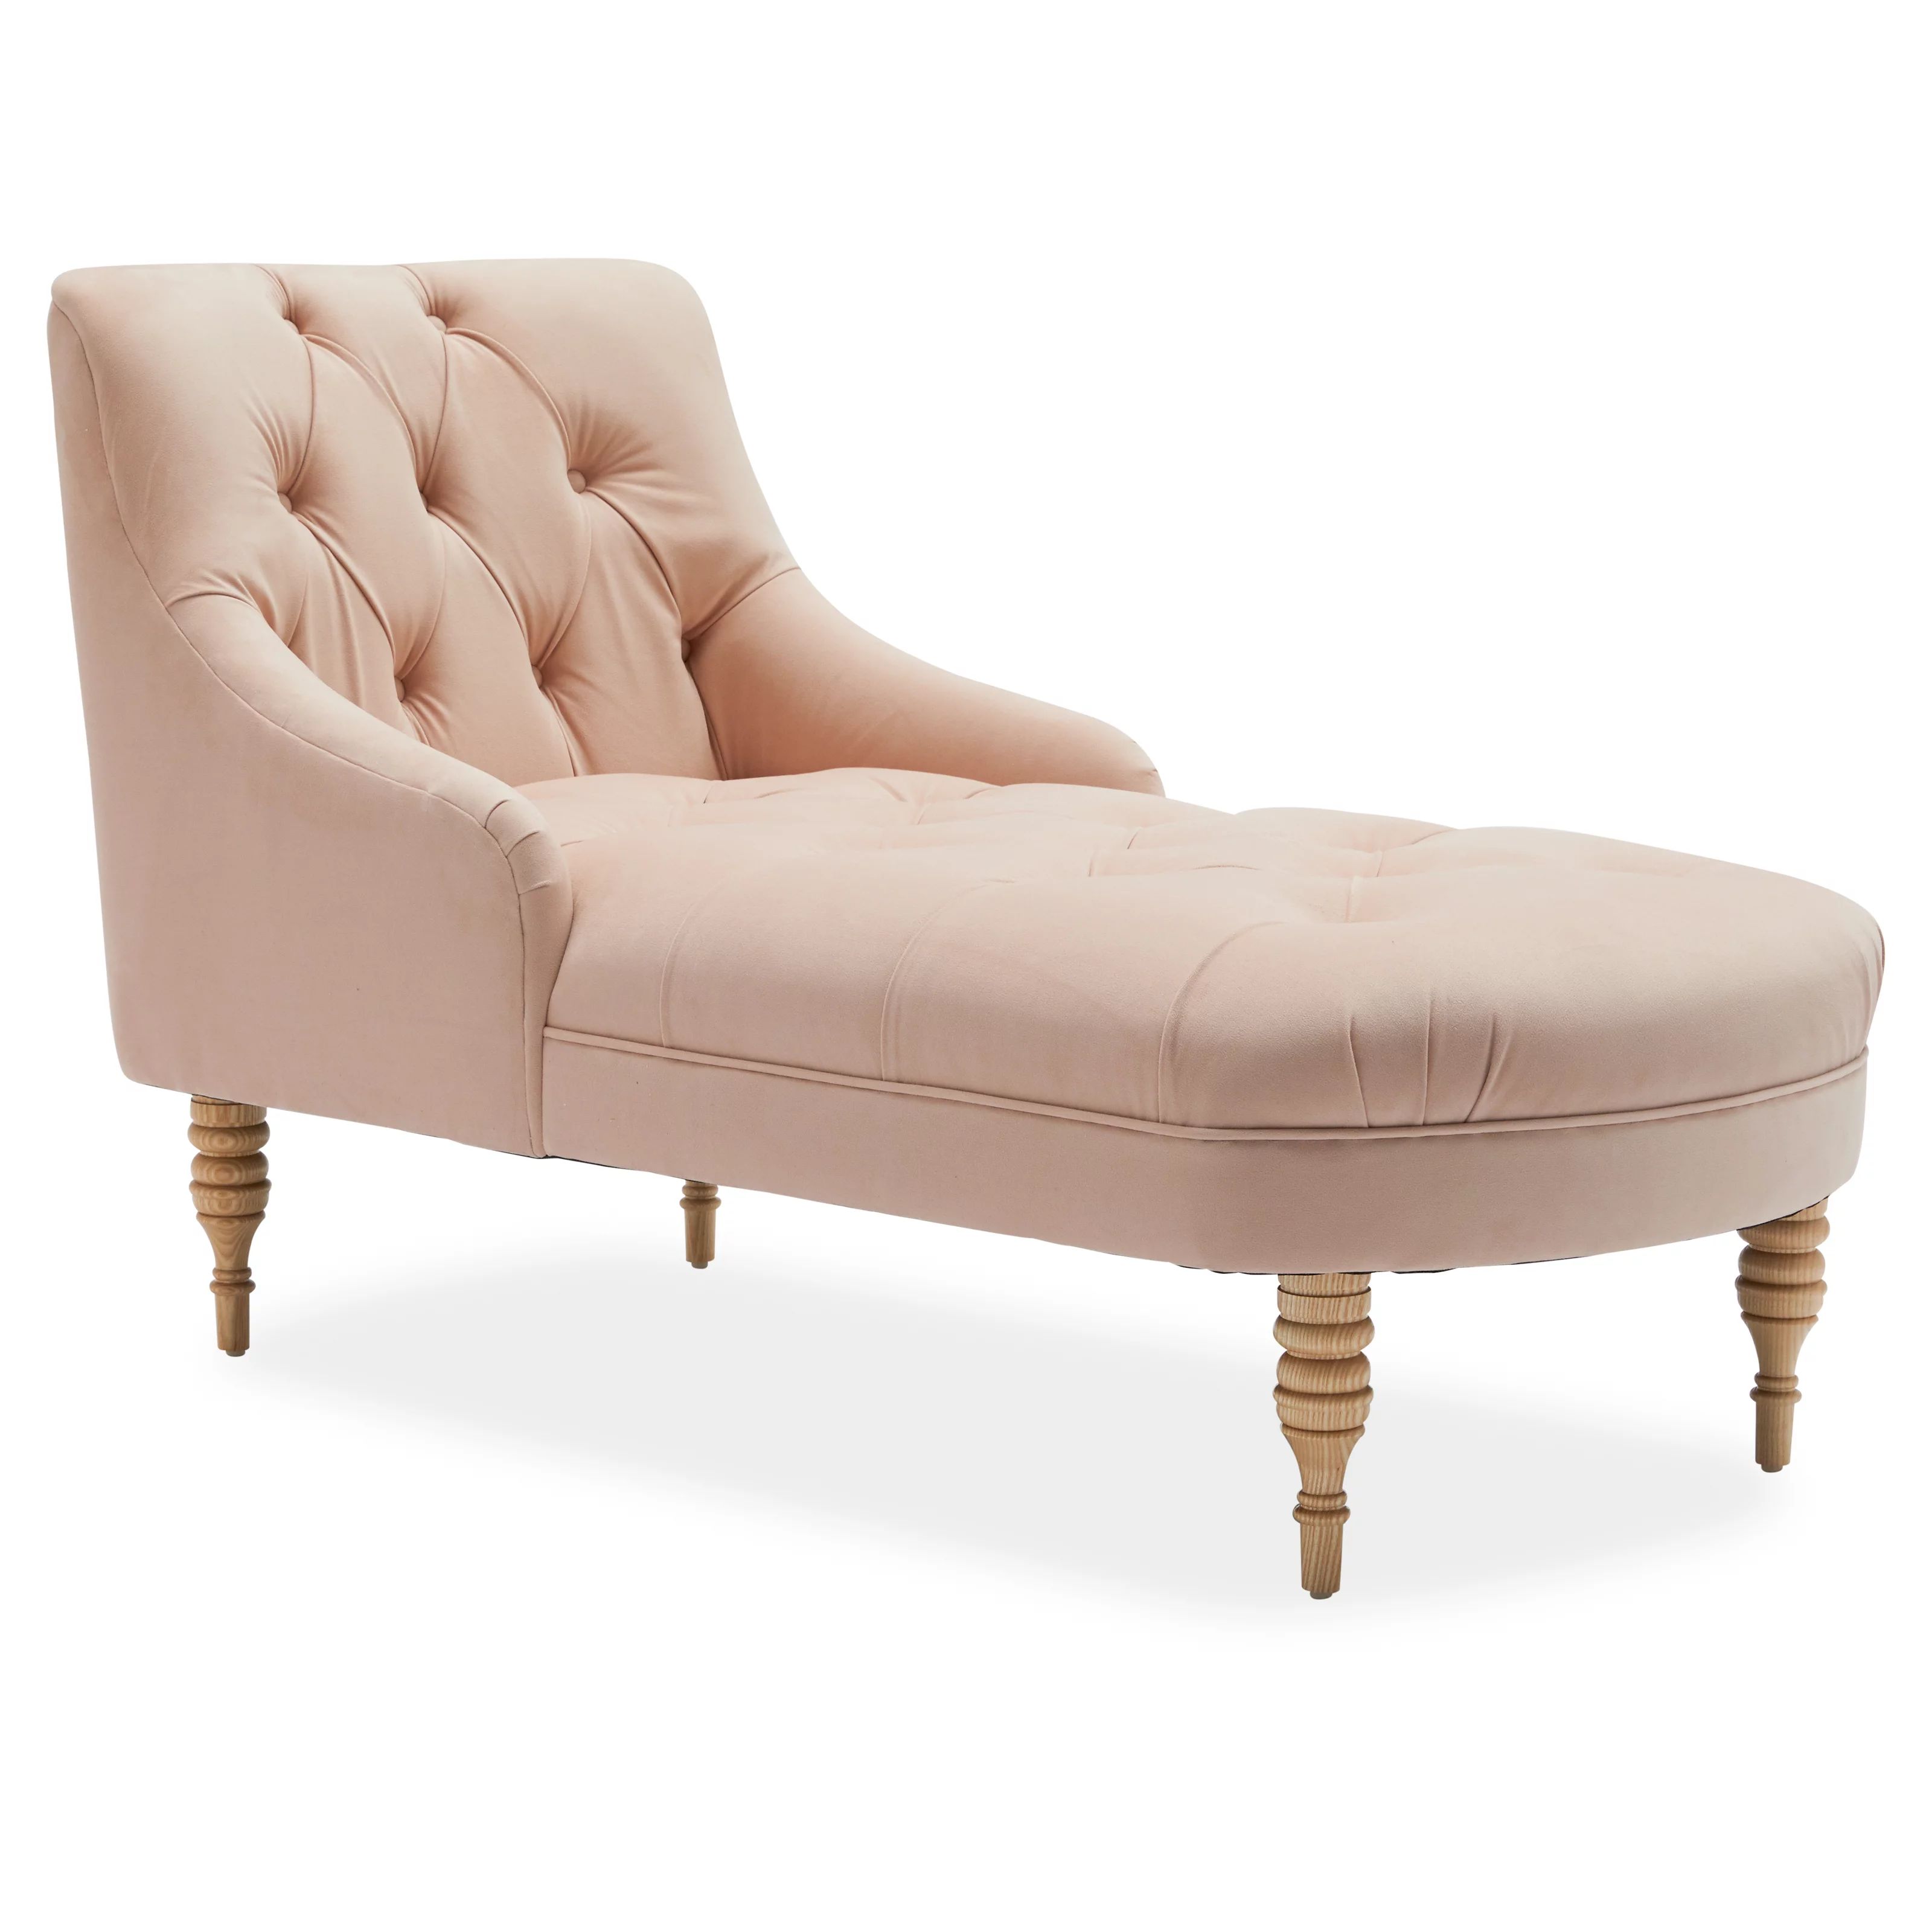 Tufted Chaise Lounge, Multiple Colors by Drew Barrymore Flower Home | Walmart (US)